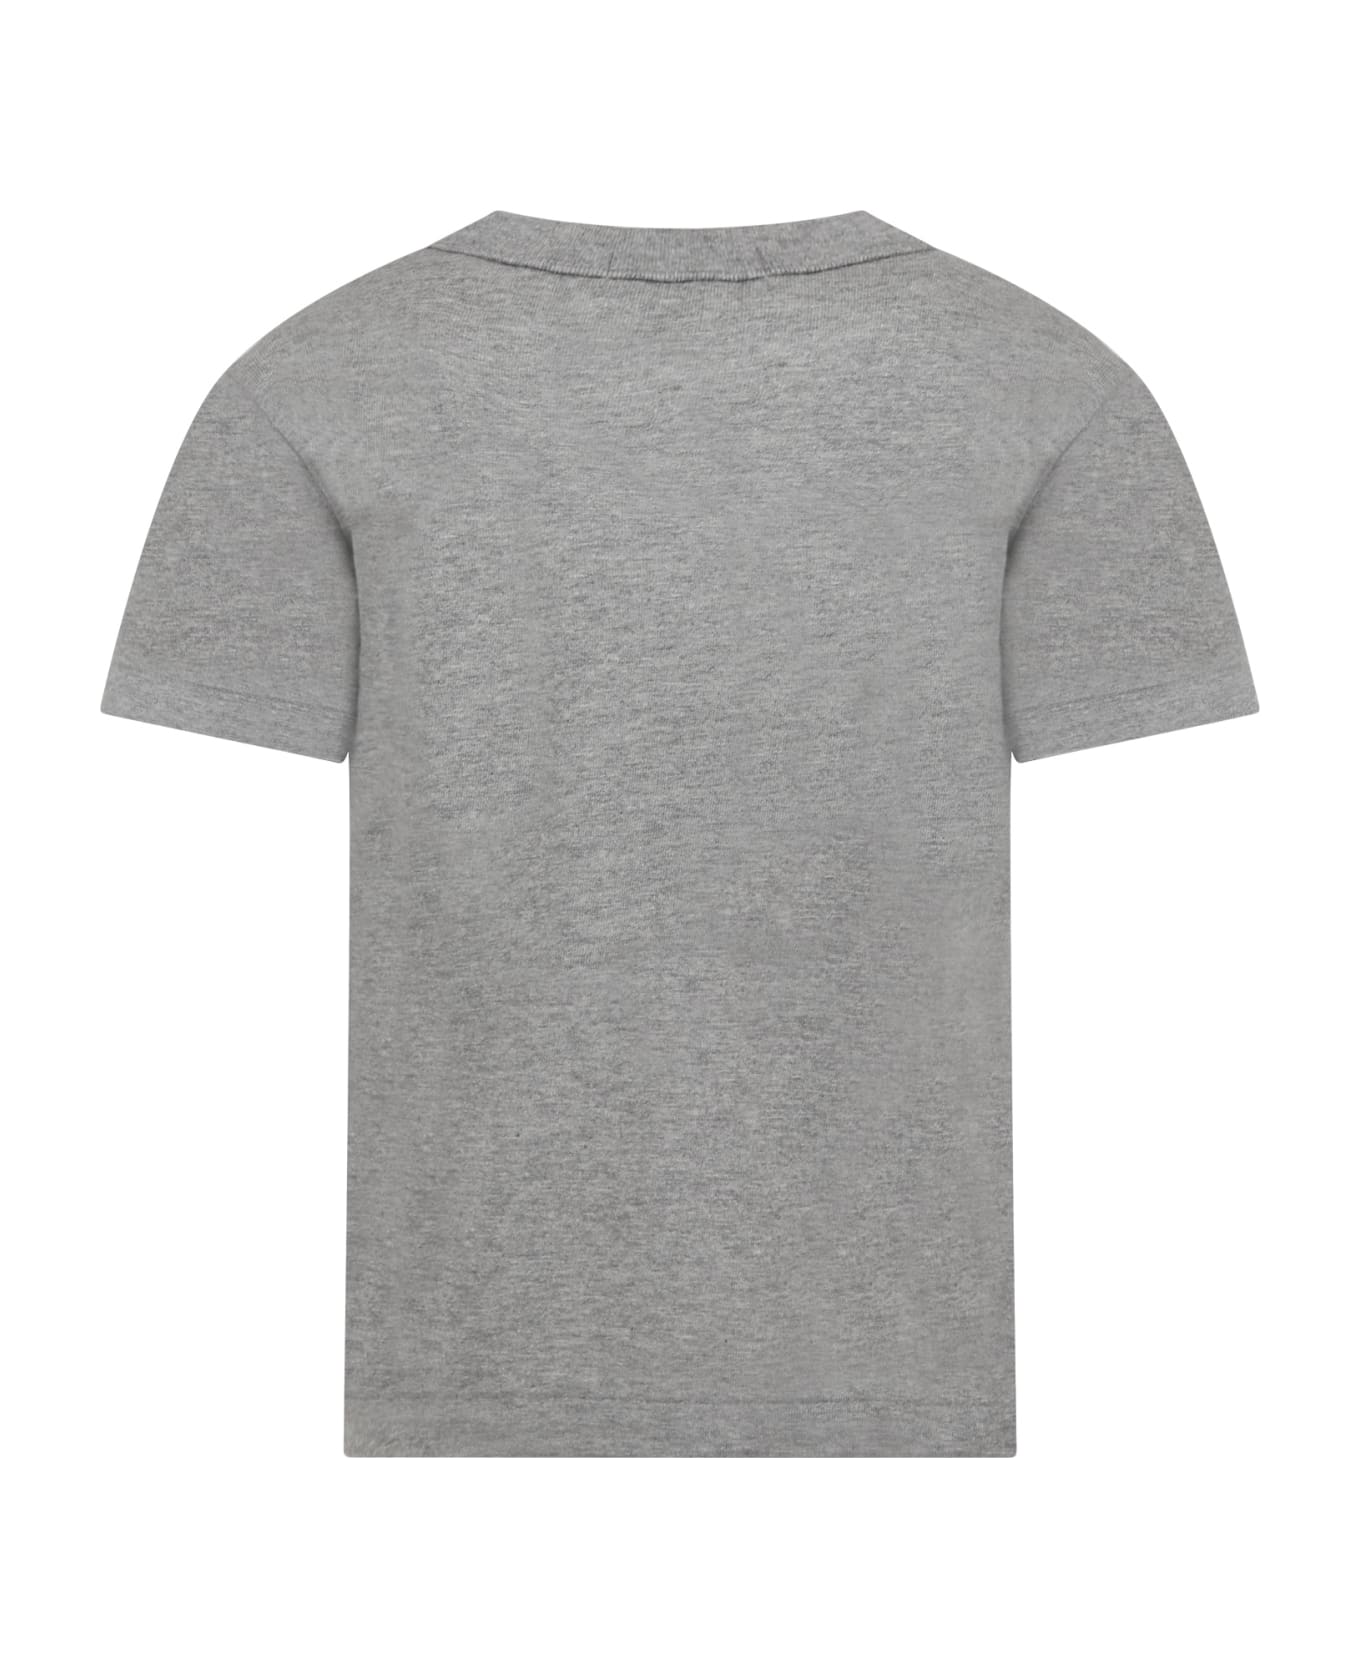 Comme des Garçons Play Grey T-shirt For Kids With Logo - Grey